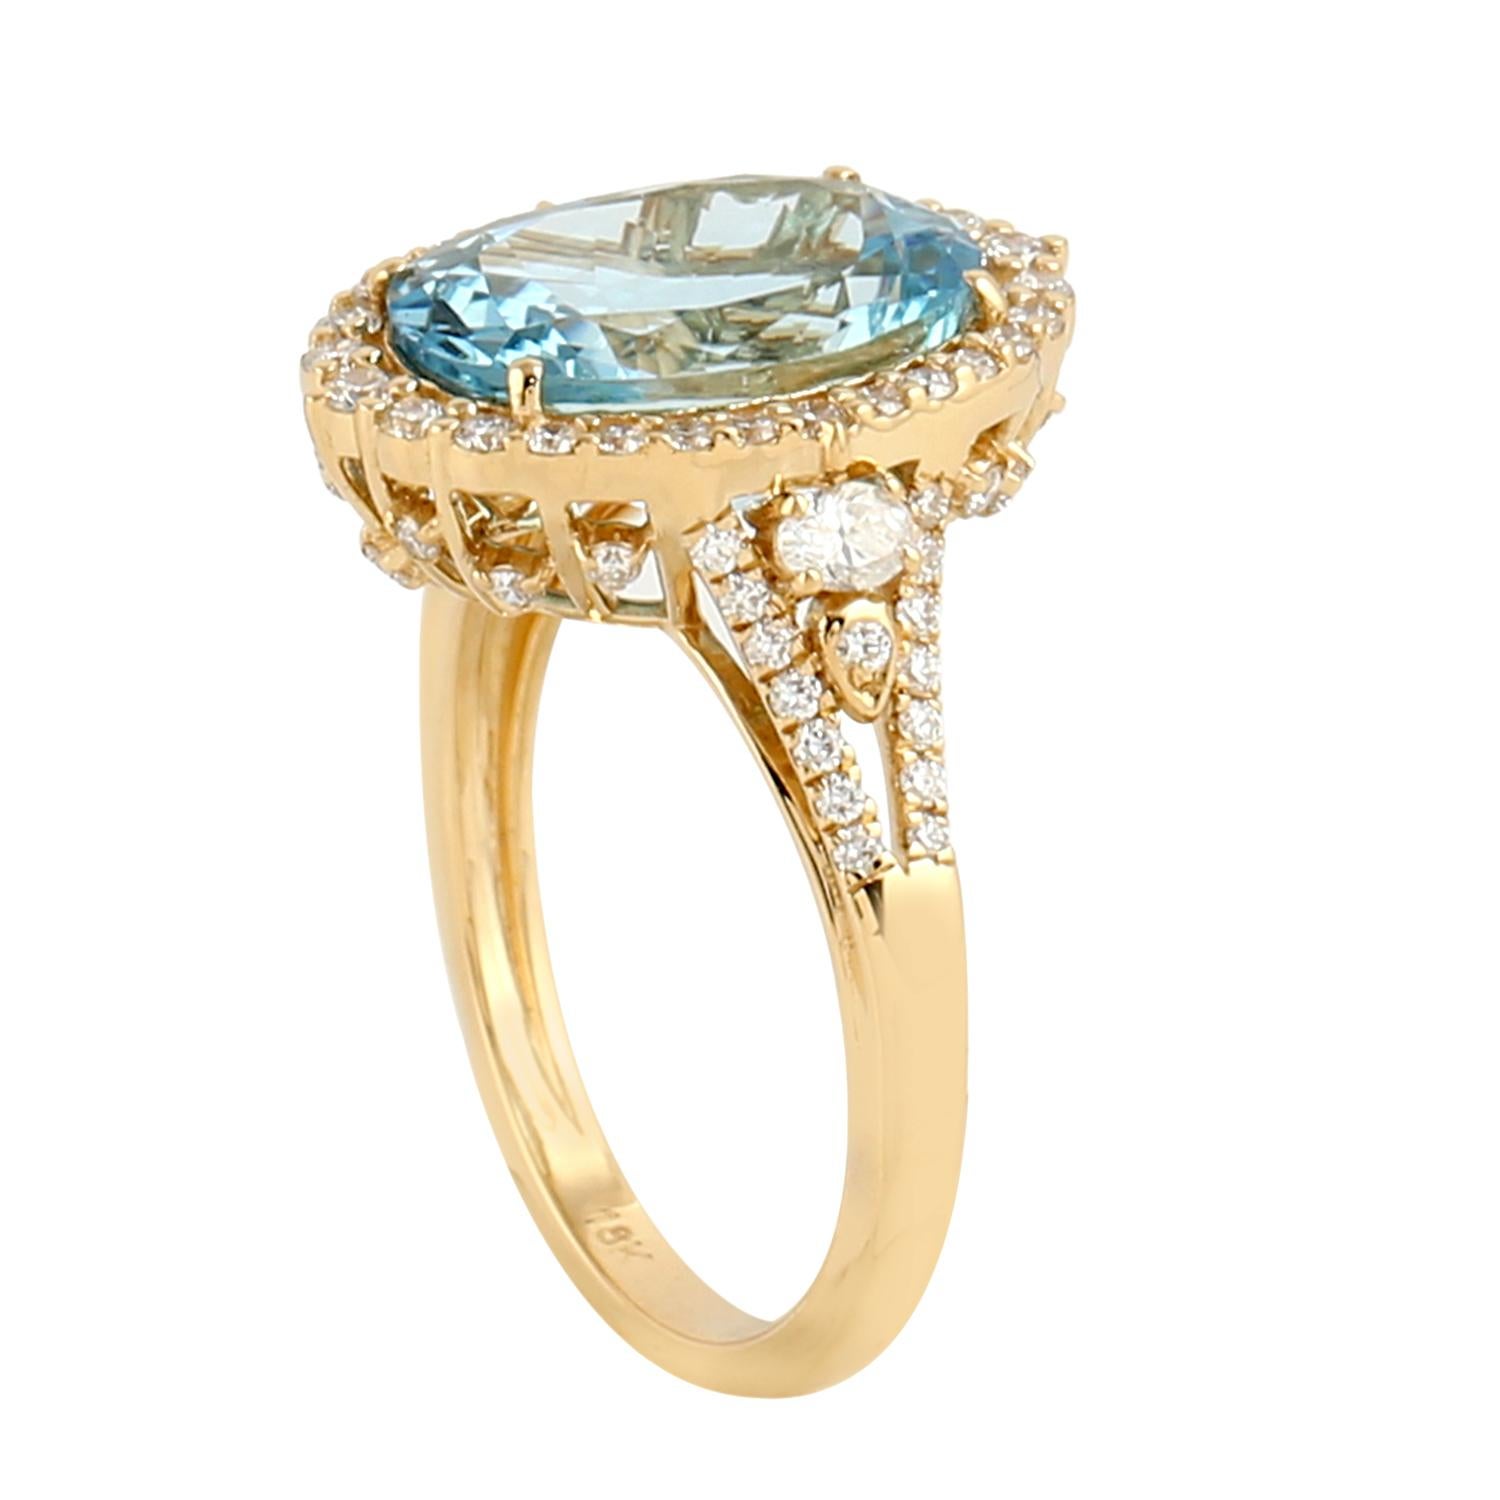 Oval Cut Classic Oval Shape Aquamarine Cocktail Solitaire Ring with Diamonds in 18k Gold